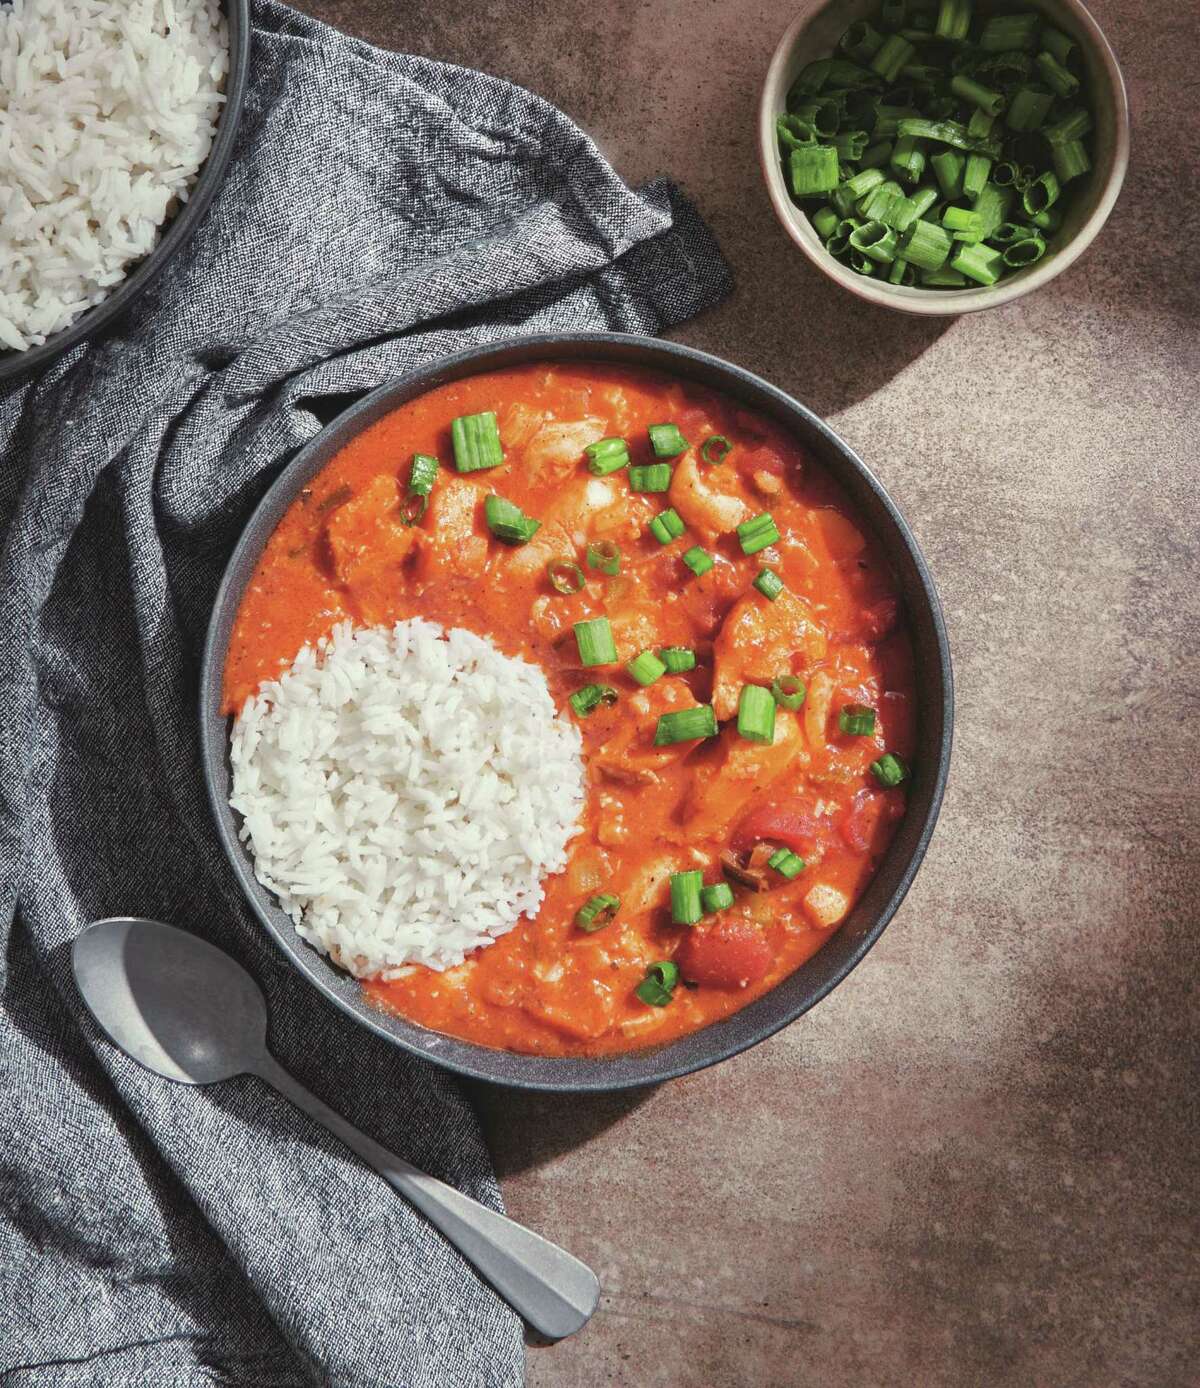 Low-Fat Creole Fish Etouffee from the new cookbook "Healthier Southern Cooking" by Eric and Shanna Jones.